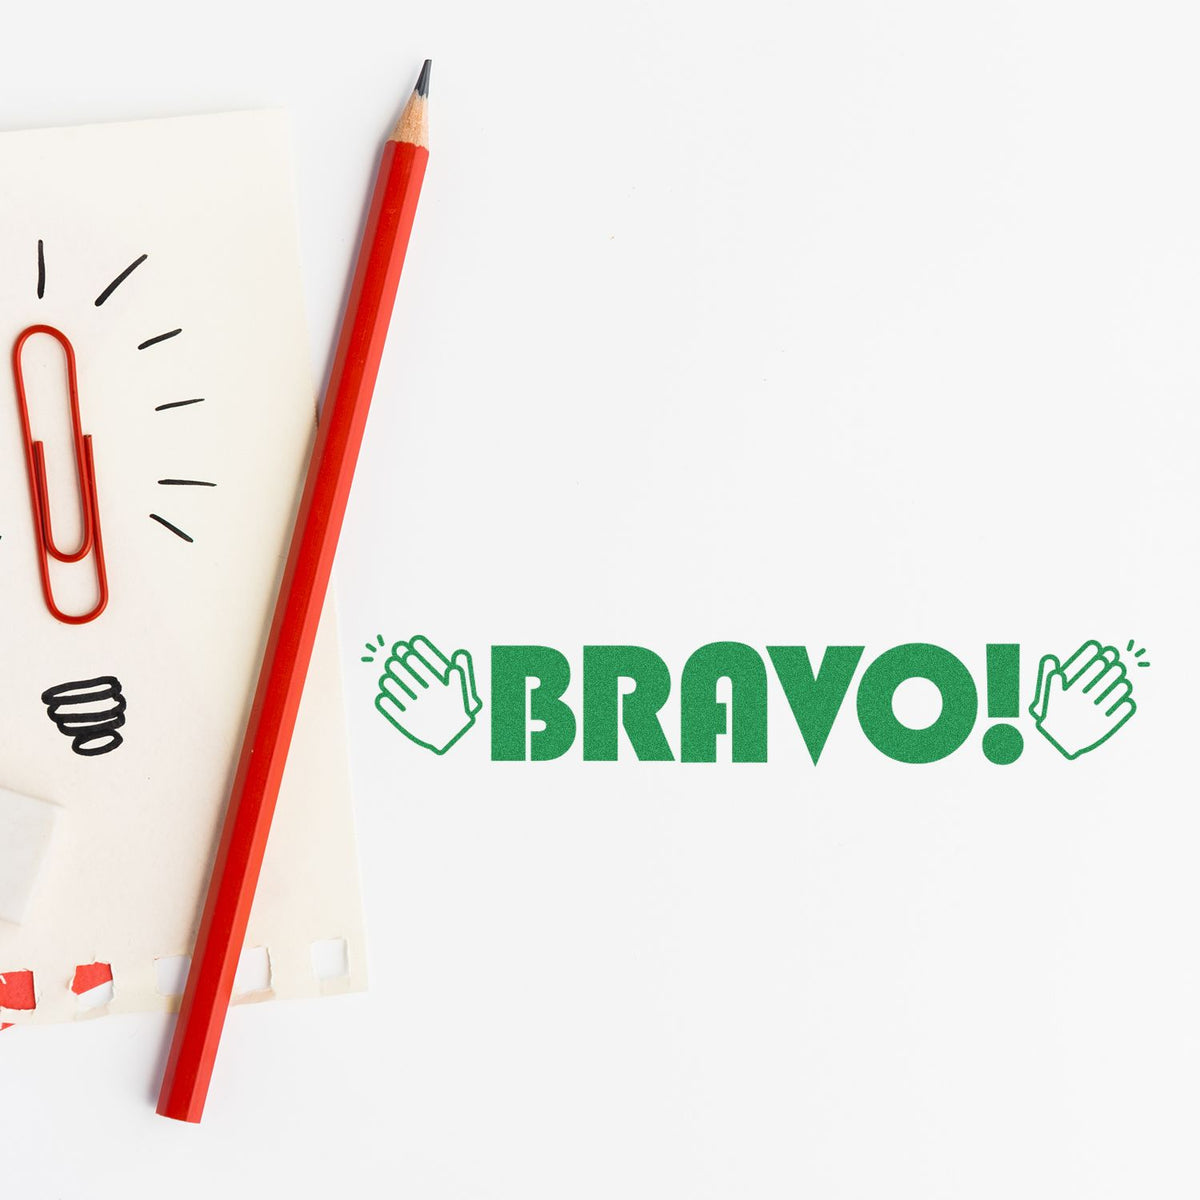 Bravo with Hands Rubber Stamp In Use